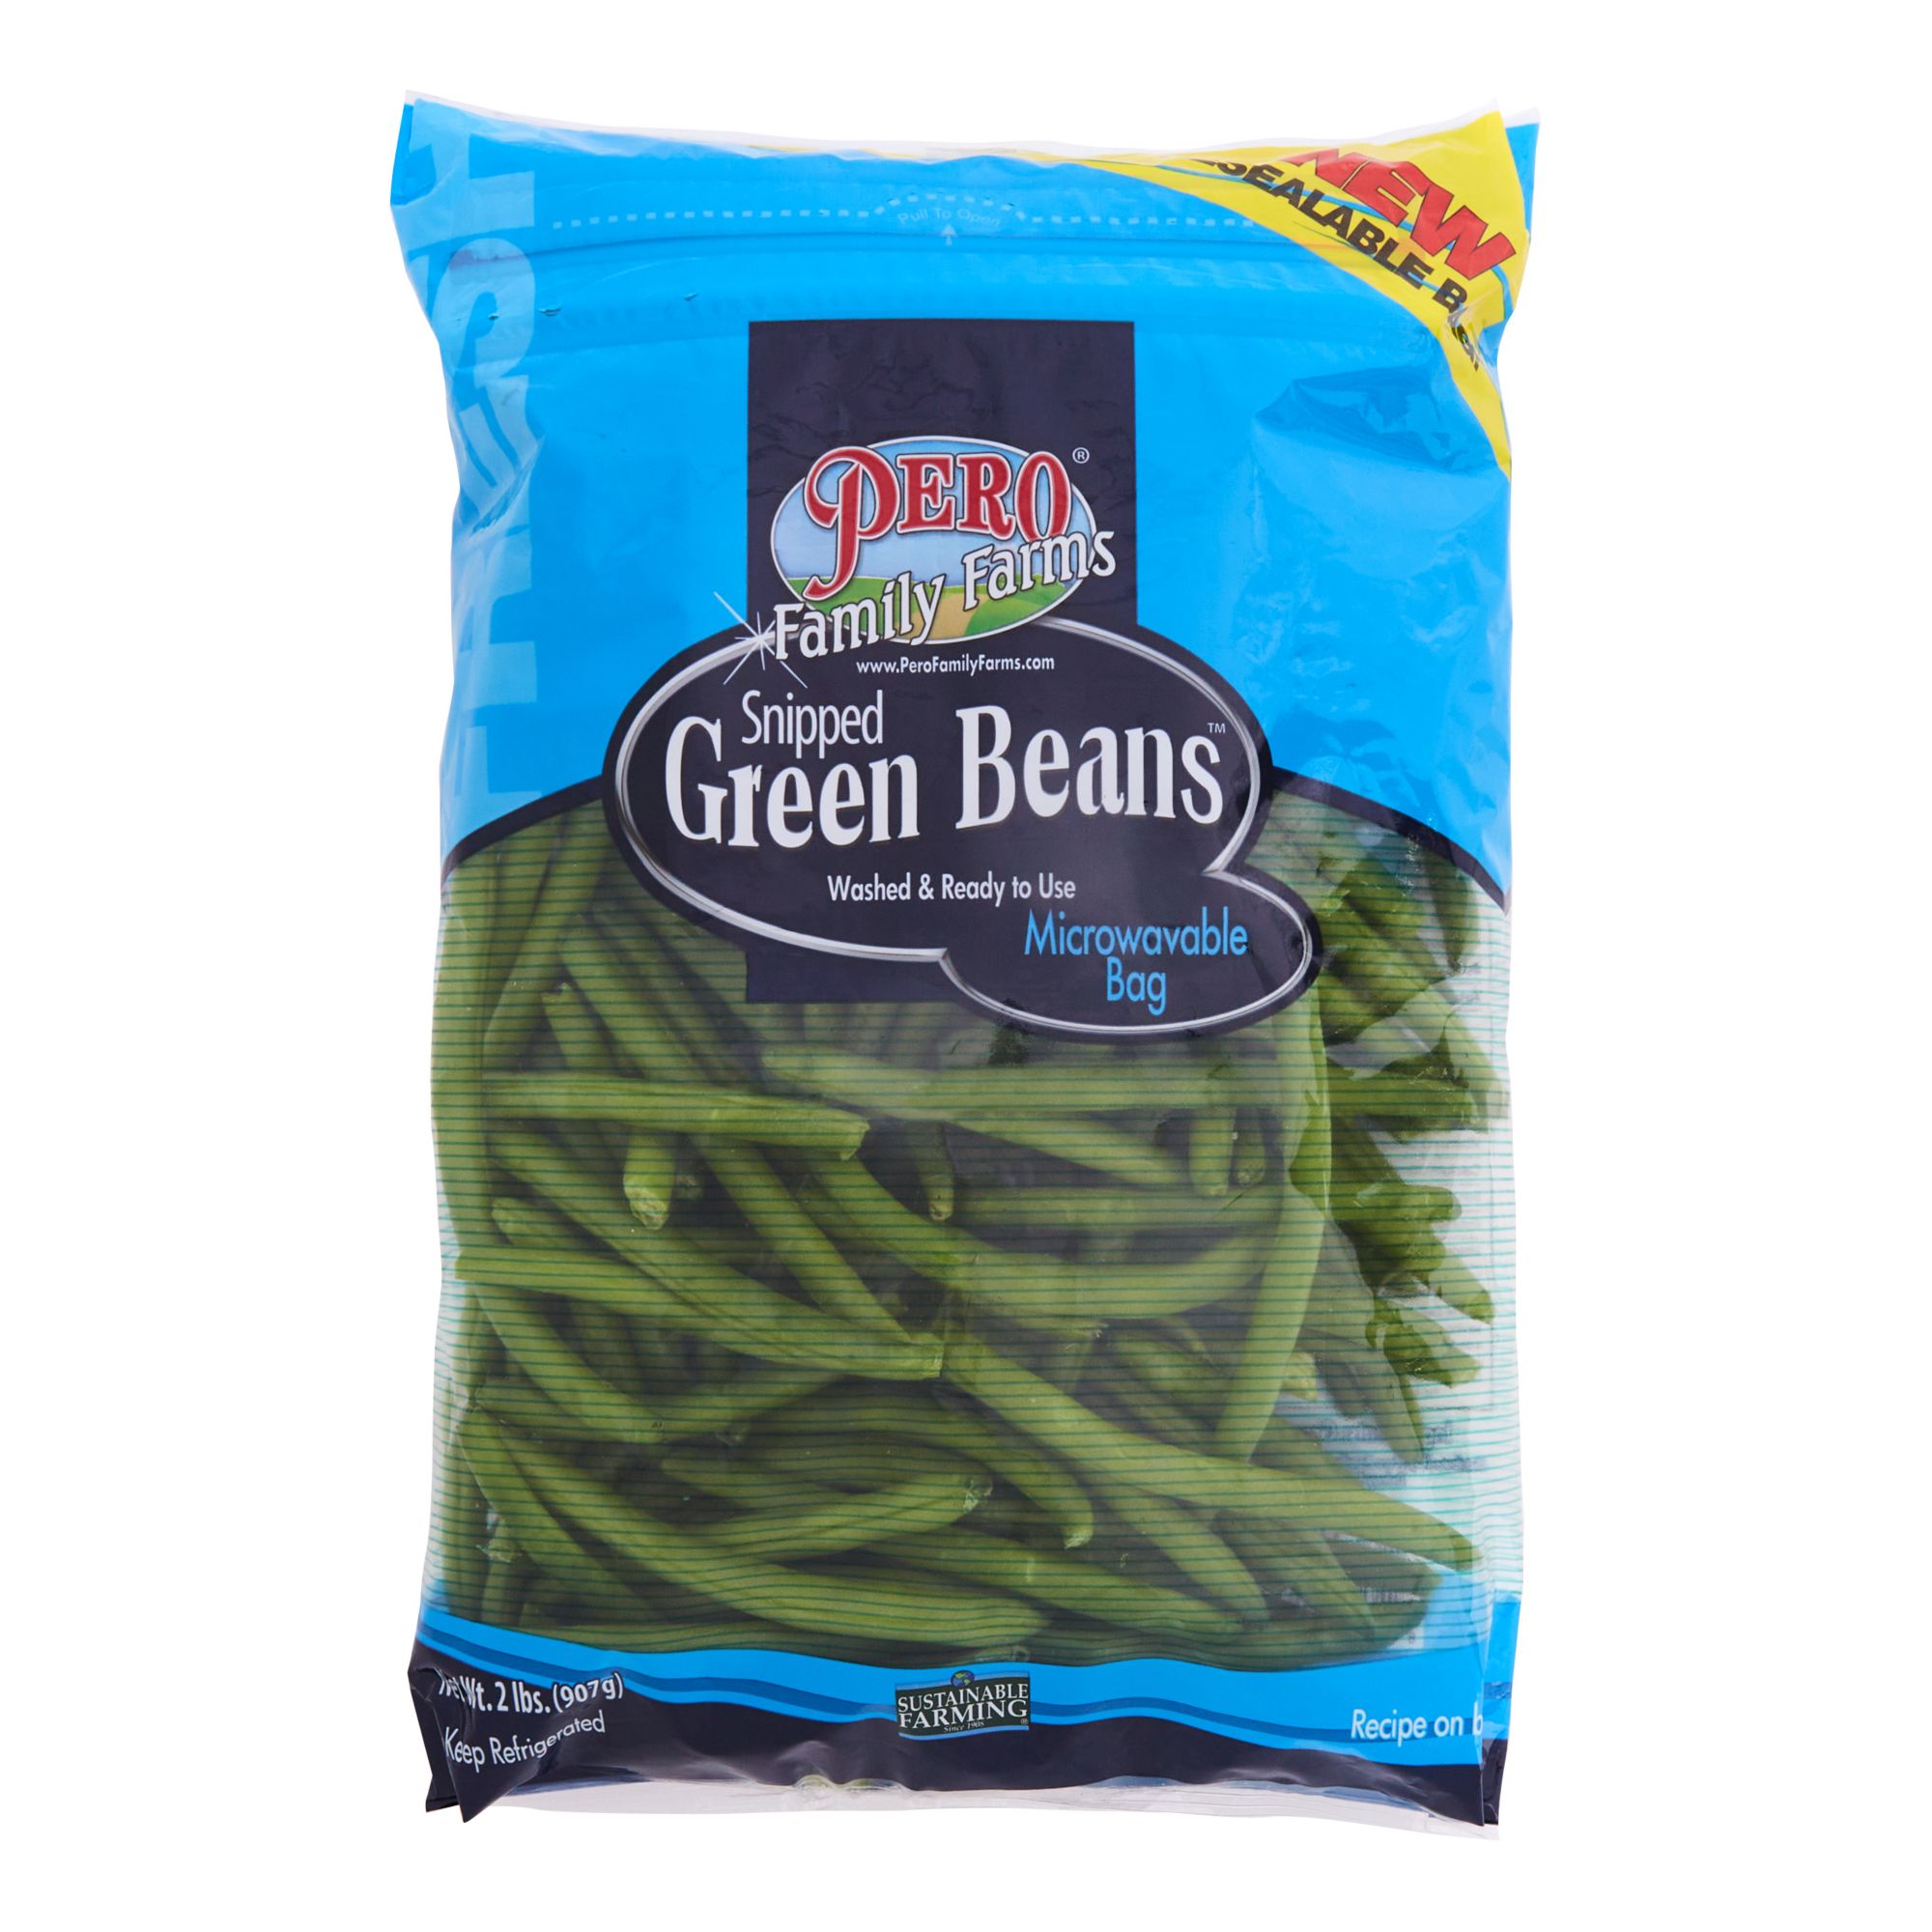 Pero Snipped Green Beans, 2 lbs.